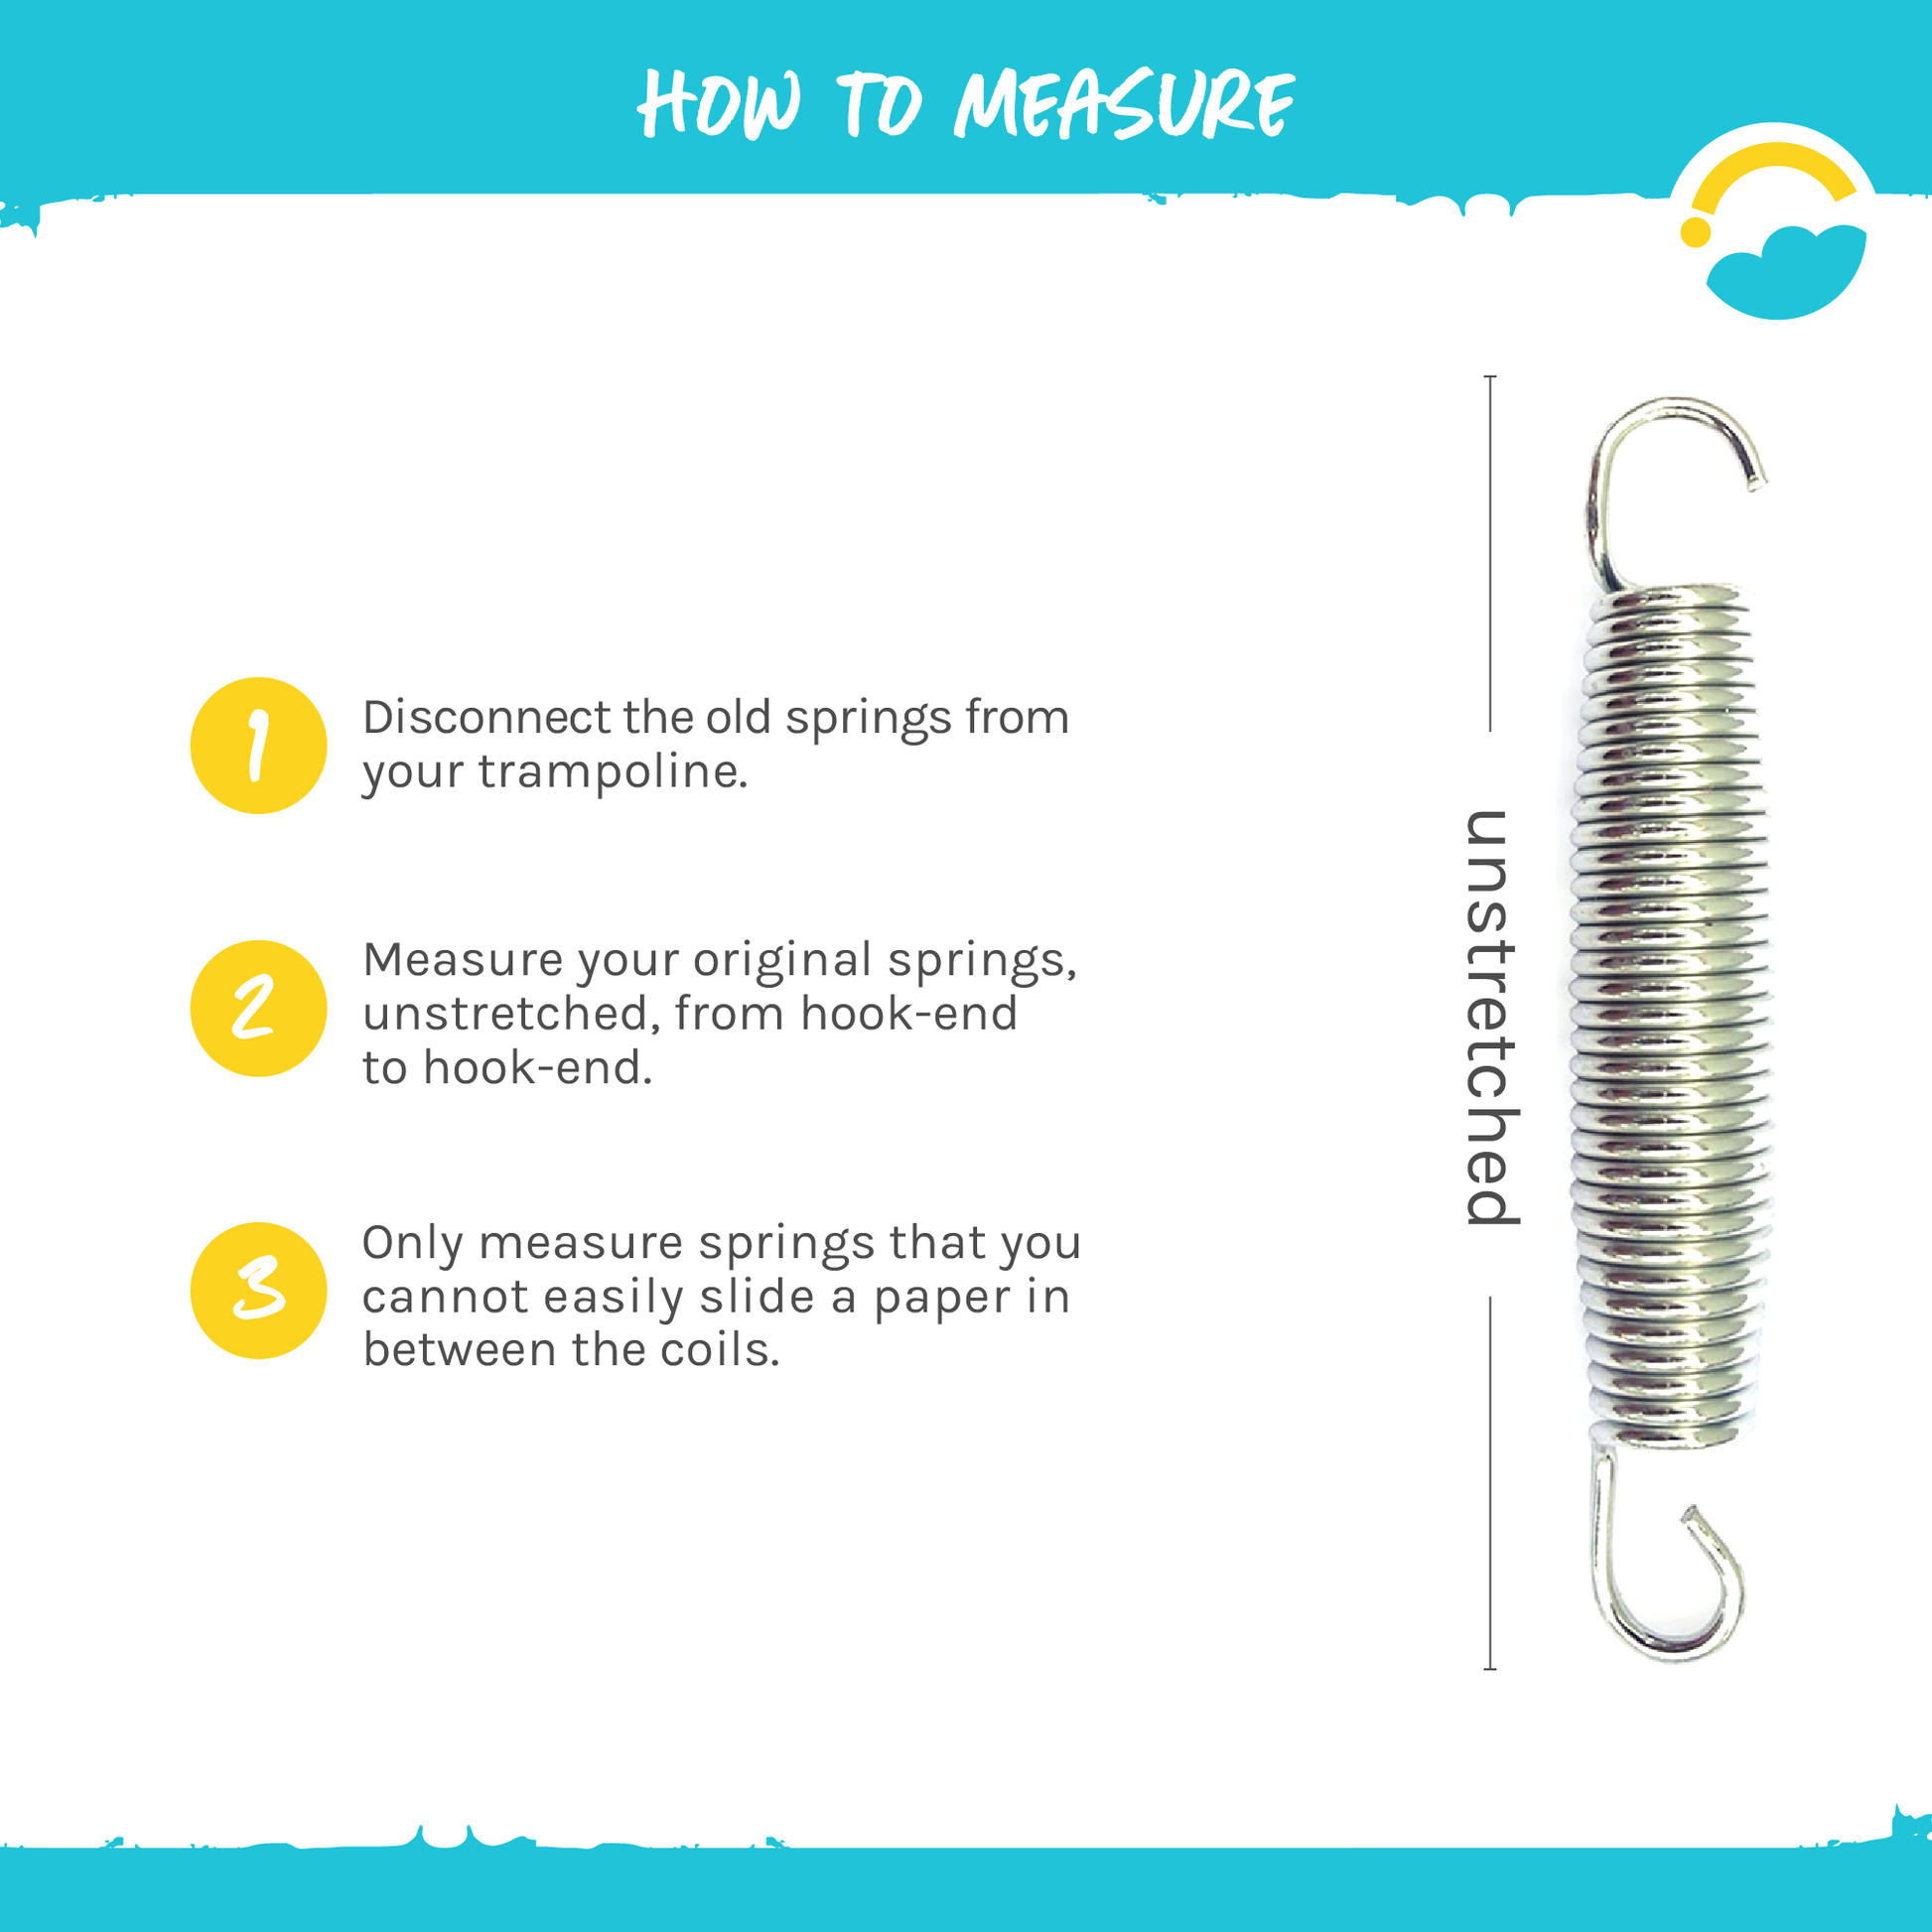 How to Measure: 1-Disconnect the old springs from your trampoline. 2-Measure your original springs, unstretched, from, from hook-end to hook-end. 3-Only measure springs that you cannot easily slide a paper in between the coils.